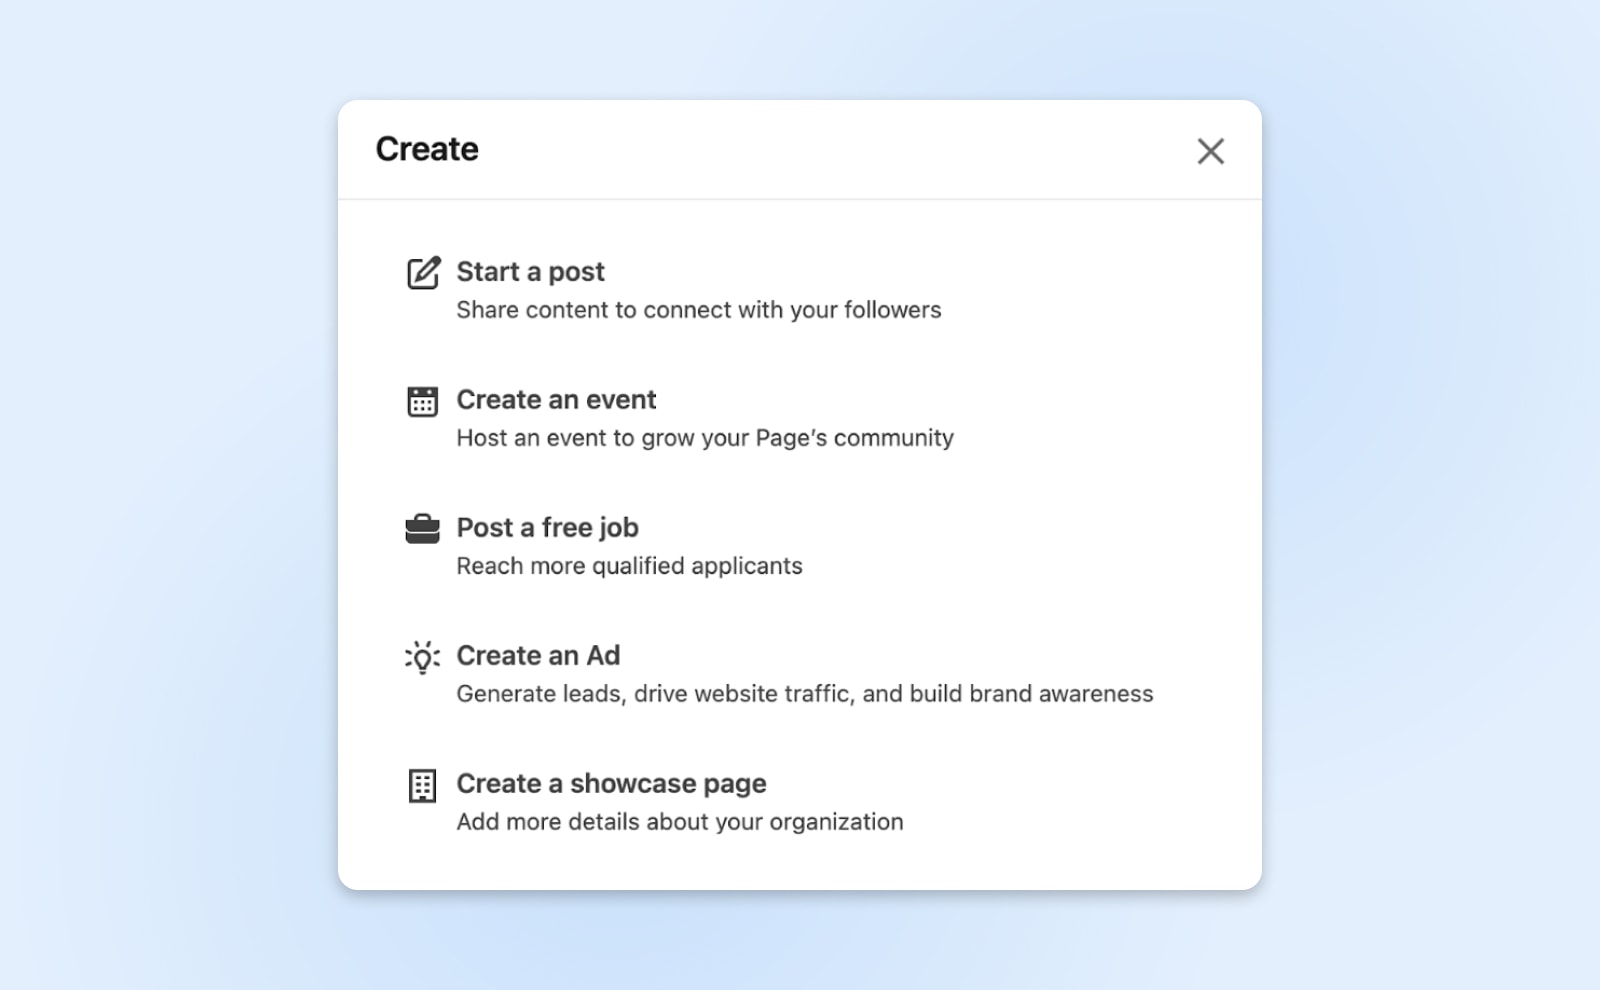 Create menu with options: start a post, create an event, post a free job, create an ad, create a showcase page